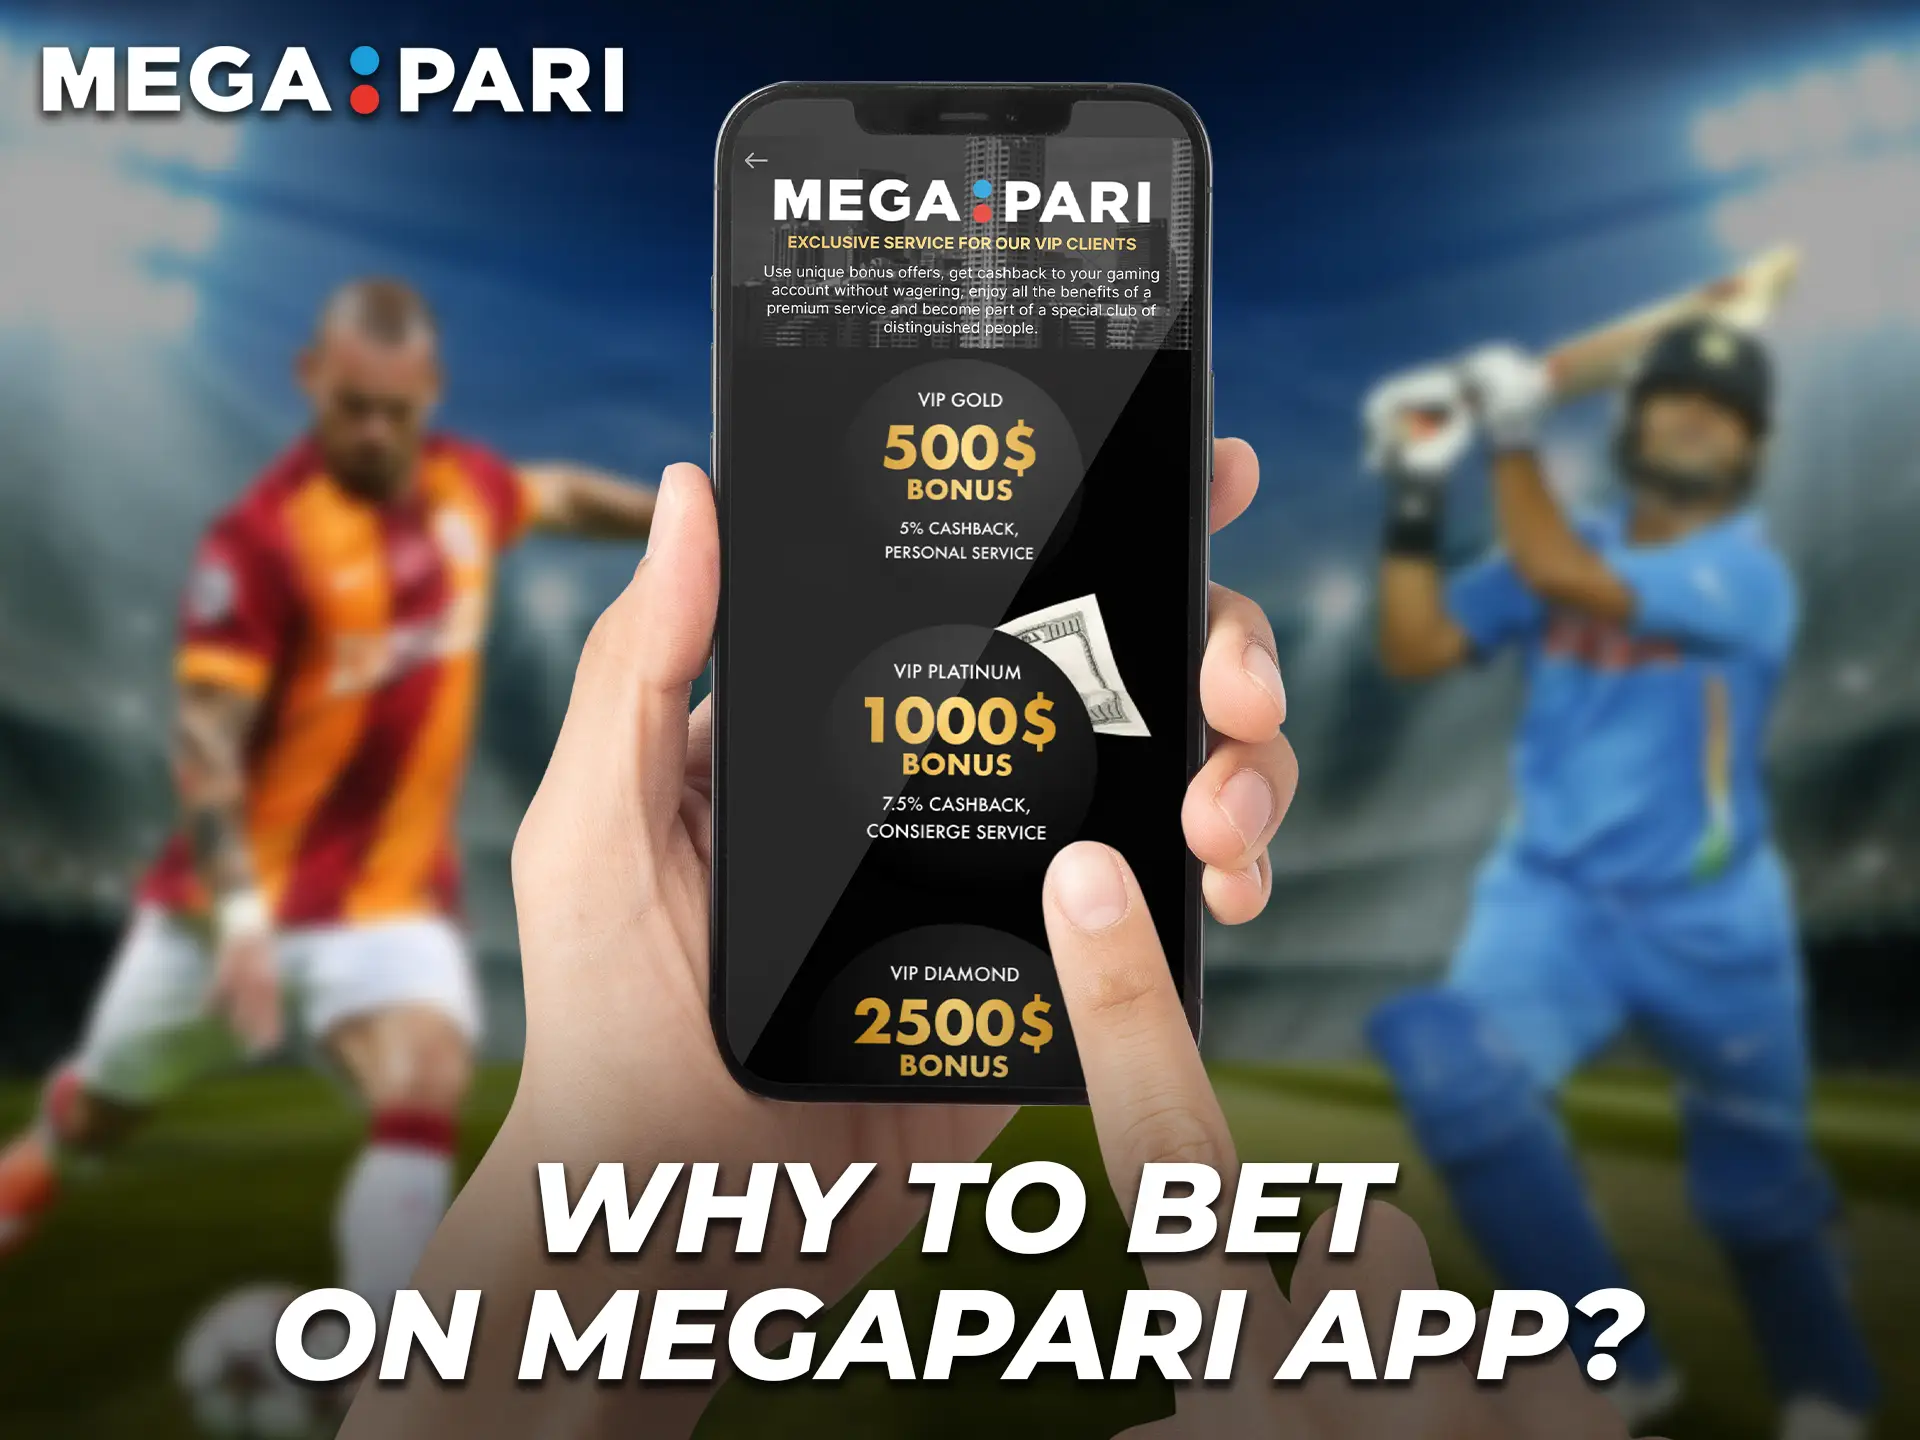 The Megapari app is characterized by convenience, easy sports betting and has the best selection of Casino games.